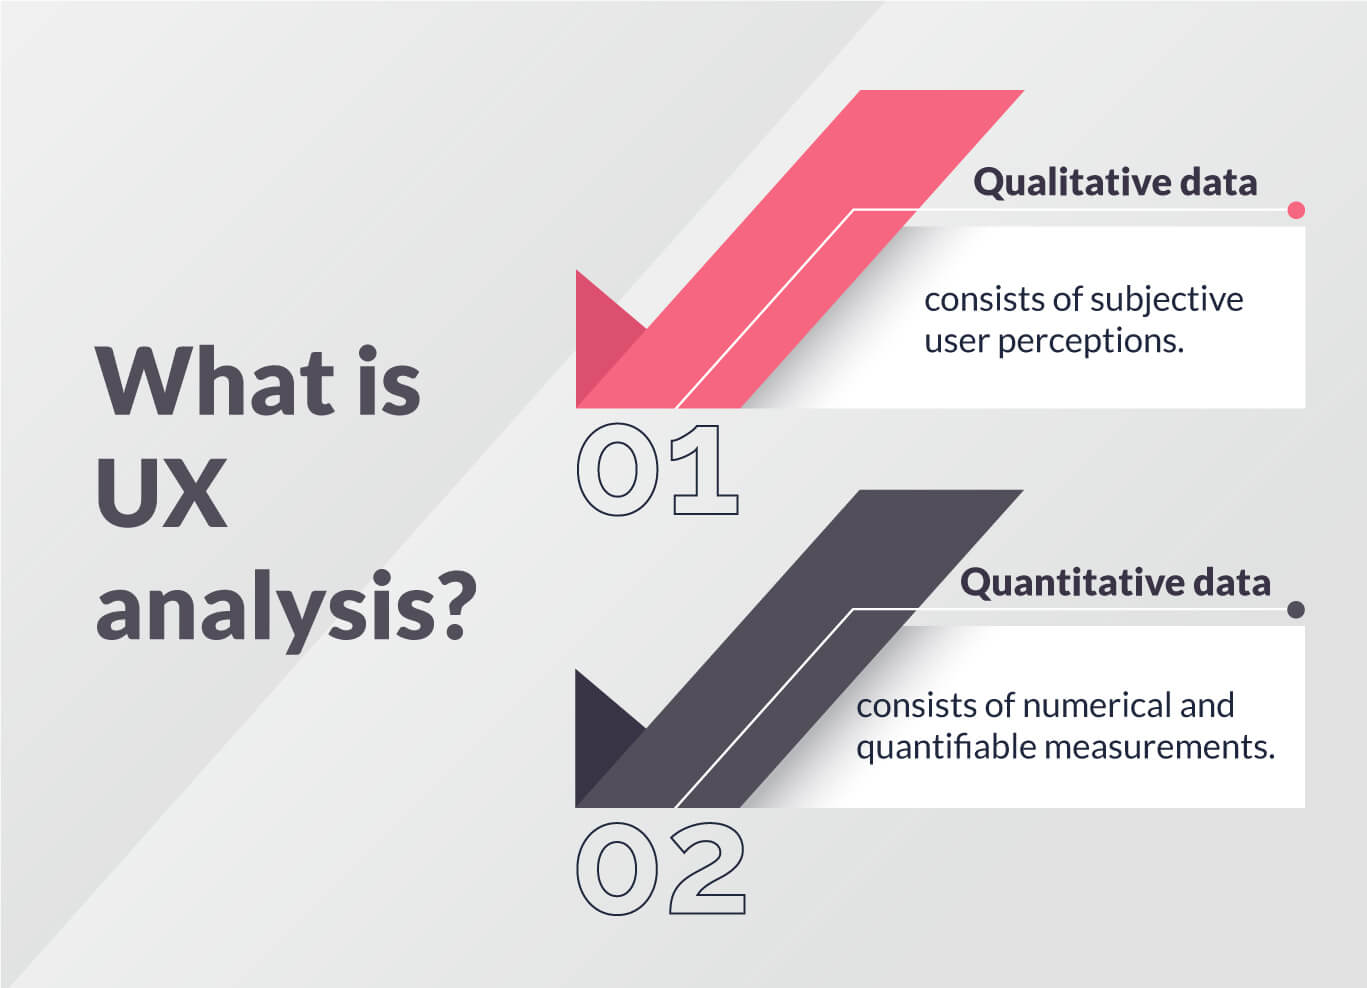 What is UX analysis